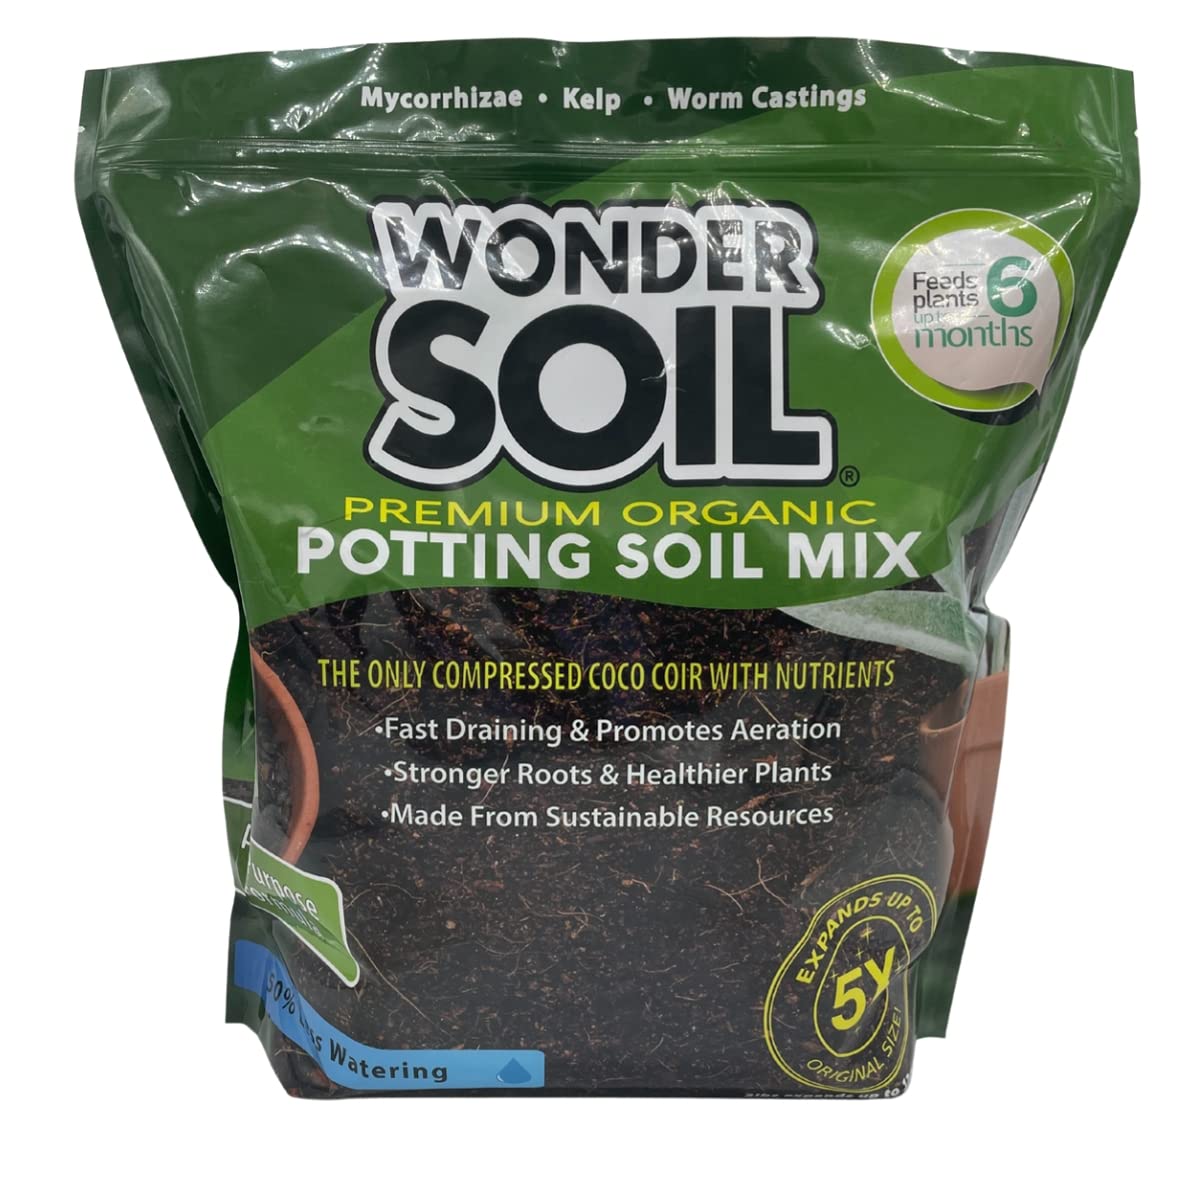 WONDER SOIL Organic Potting Soil | Ready to Plant Coco Coir Fully Loaded with Nutrients | 3 LBS Bag Expands to 12 Quarts of Indo